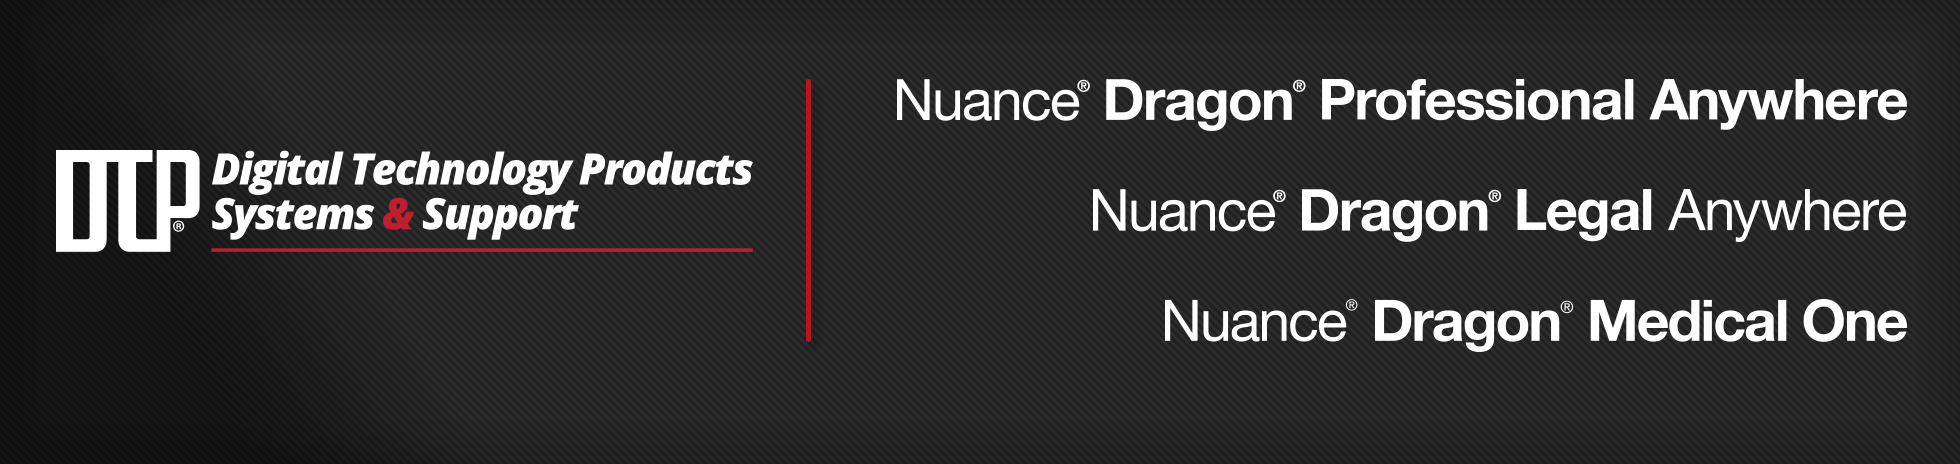 Digital Technology Products Systems & Support - Nuance Dragon Medical One - Nuance Professional Anywhere - Nuance Dragon Legal Anywhere